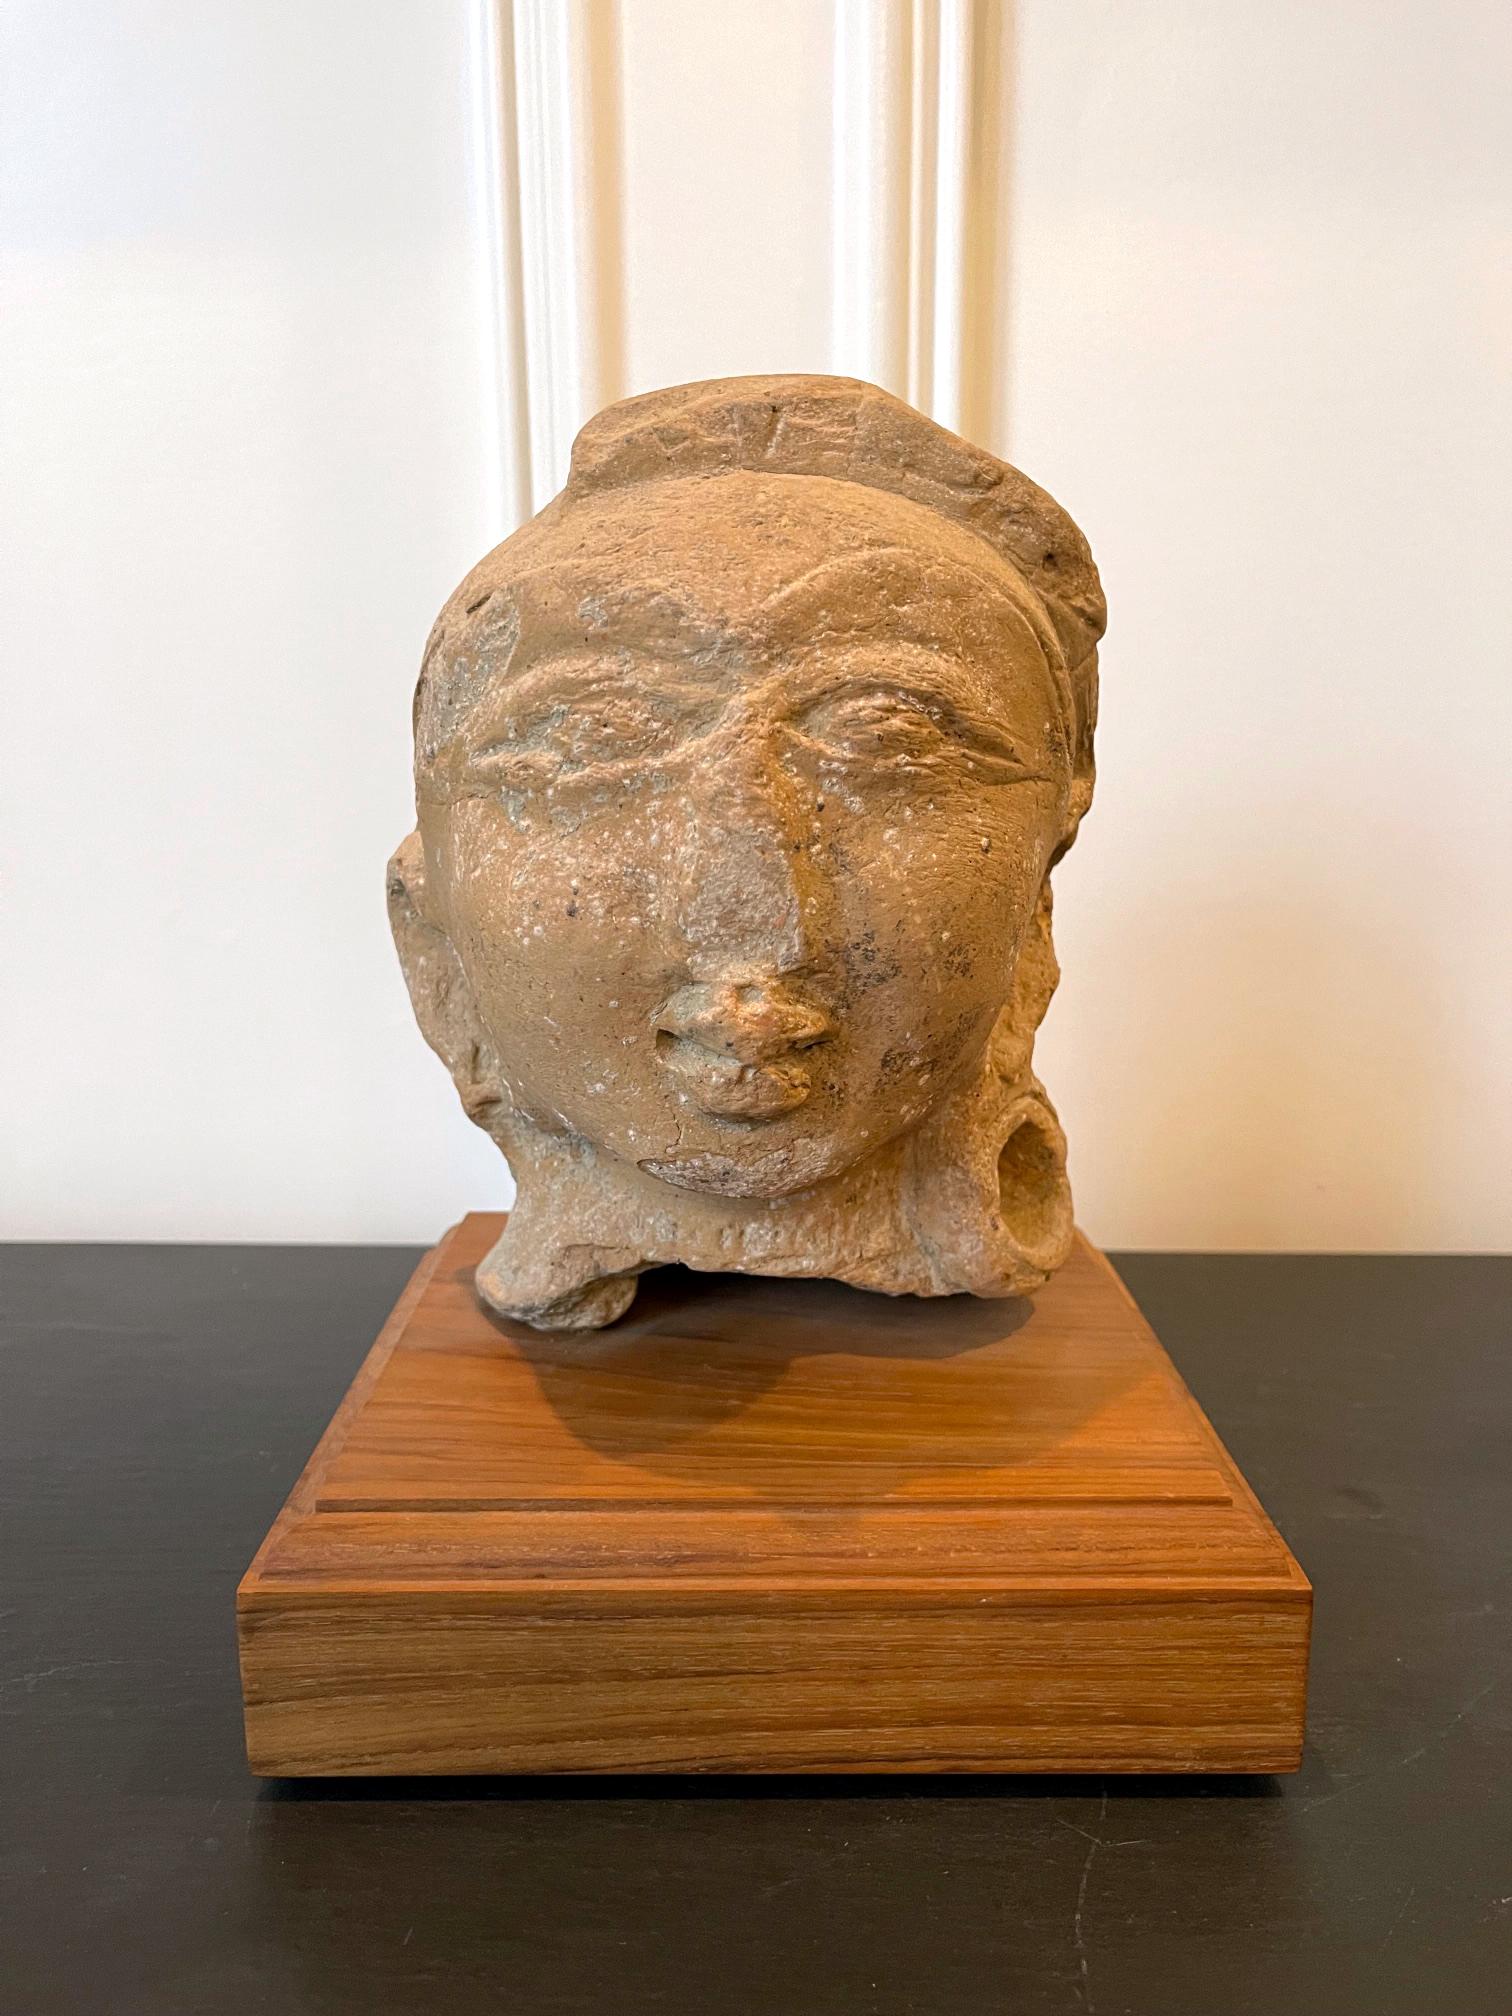 A fragment of Terracotta statue displayed on wood block stand from ancient Indian continent dated to the Gupta period (4th-6th century). The head of the deity was made from molded clay and fired at low temperature and was likely painted when it was